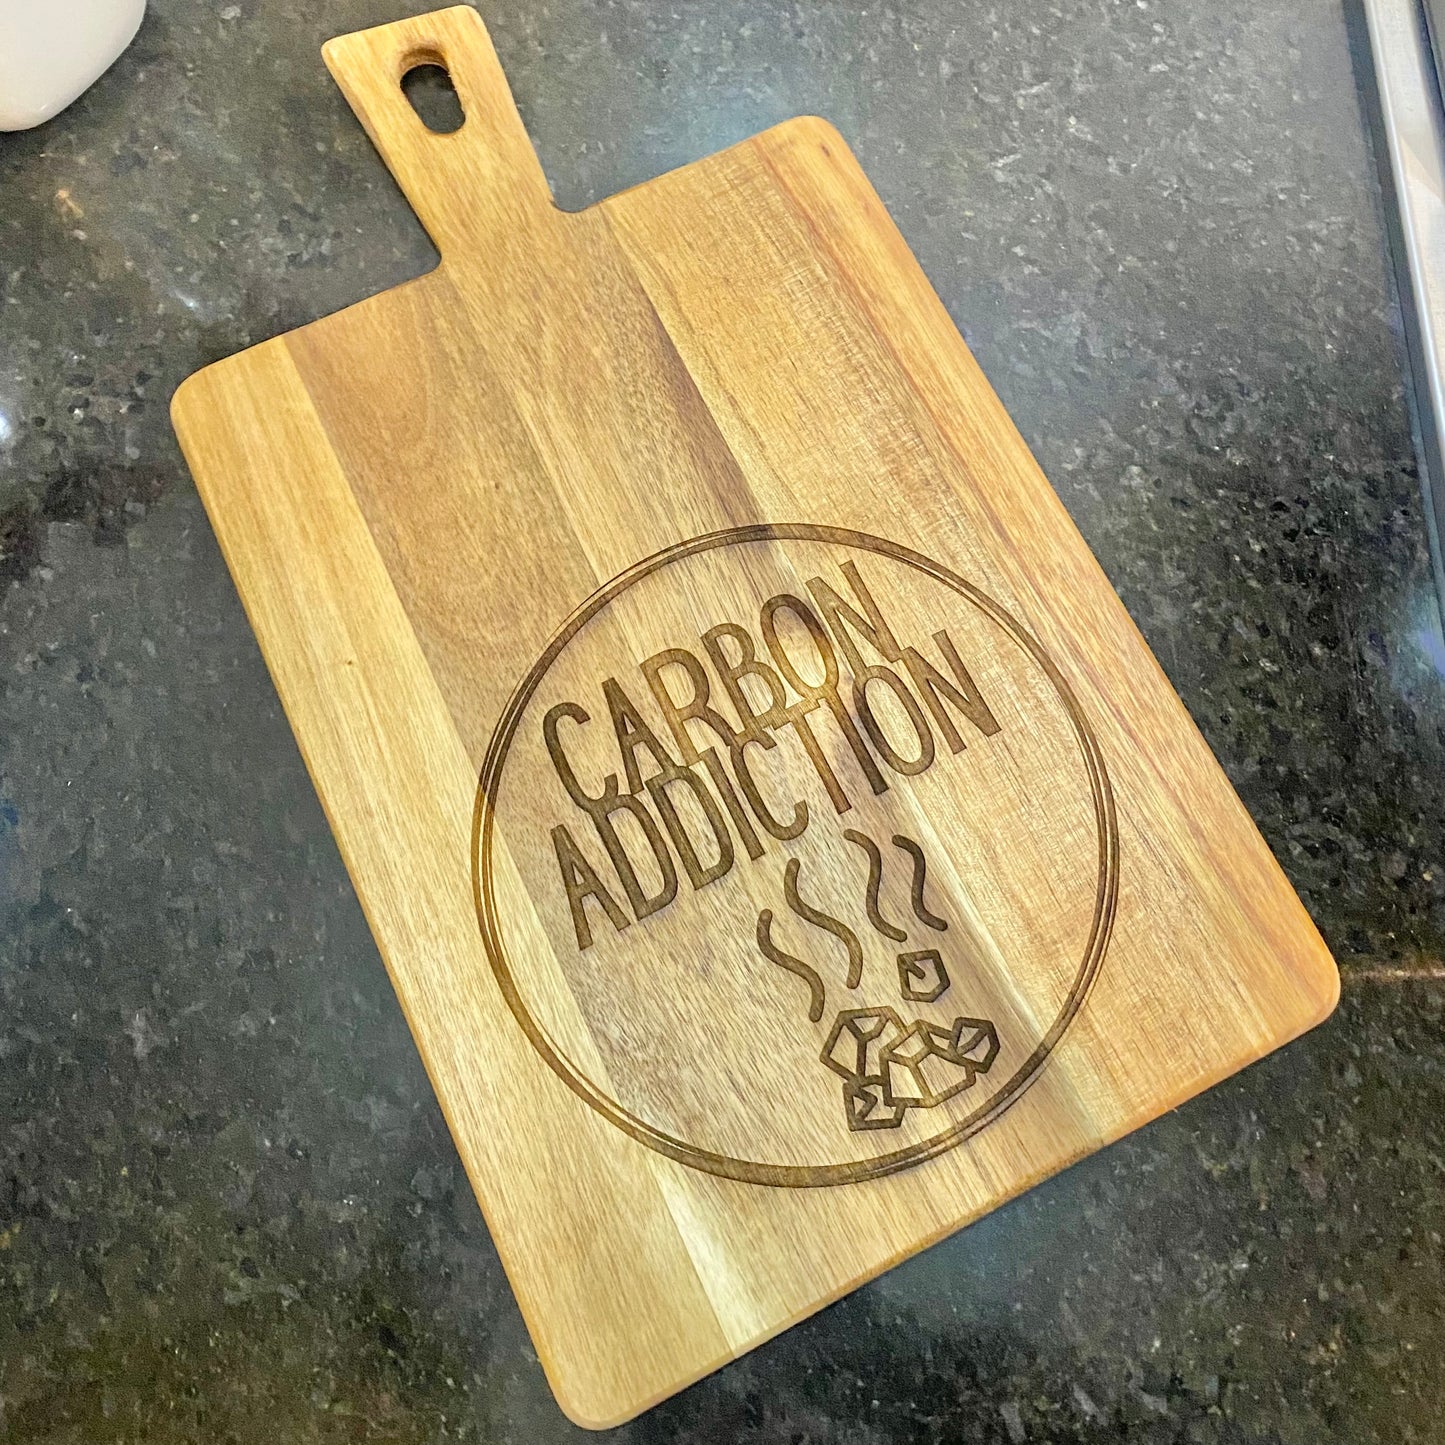 Corporate chopping boards